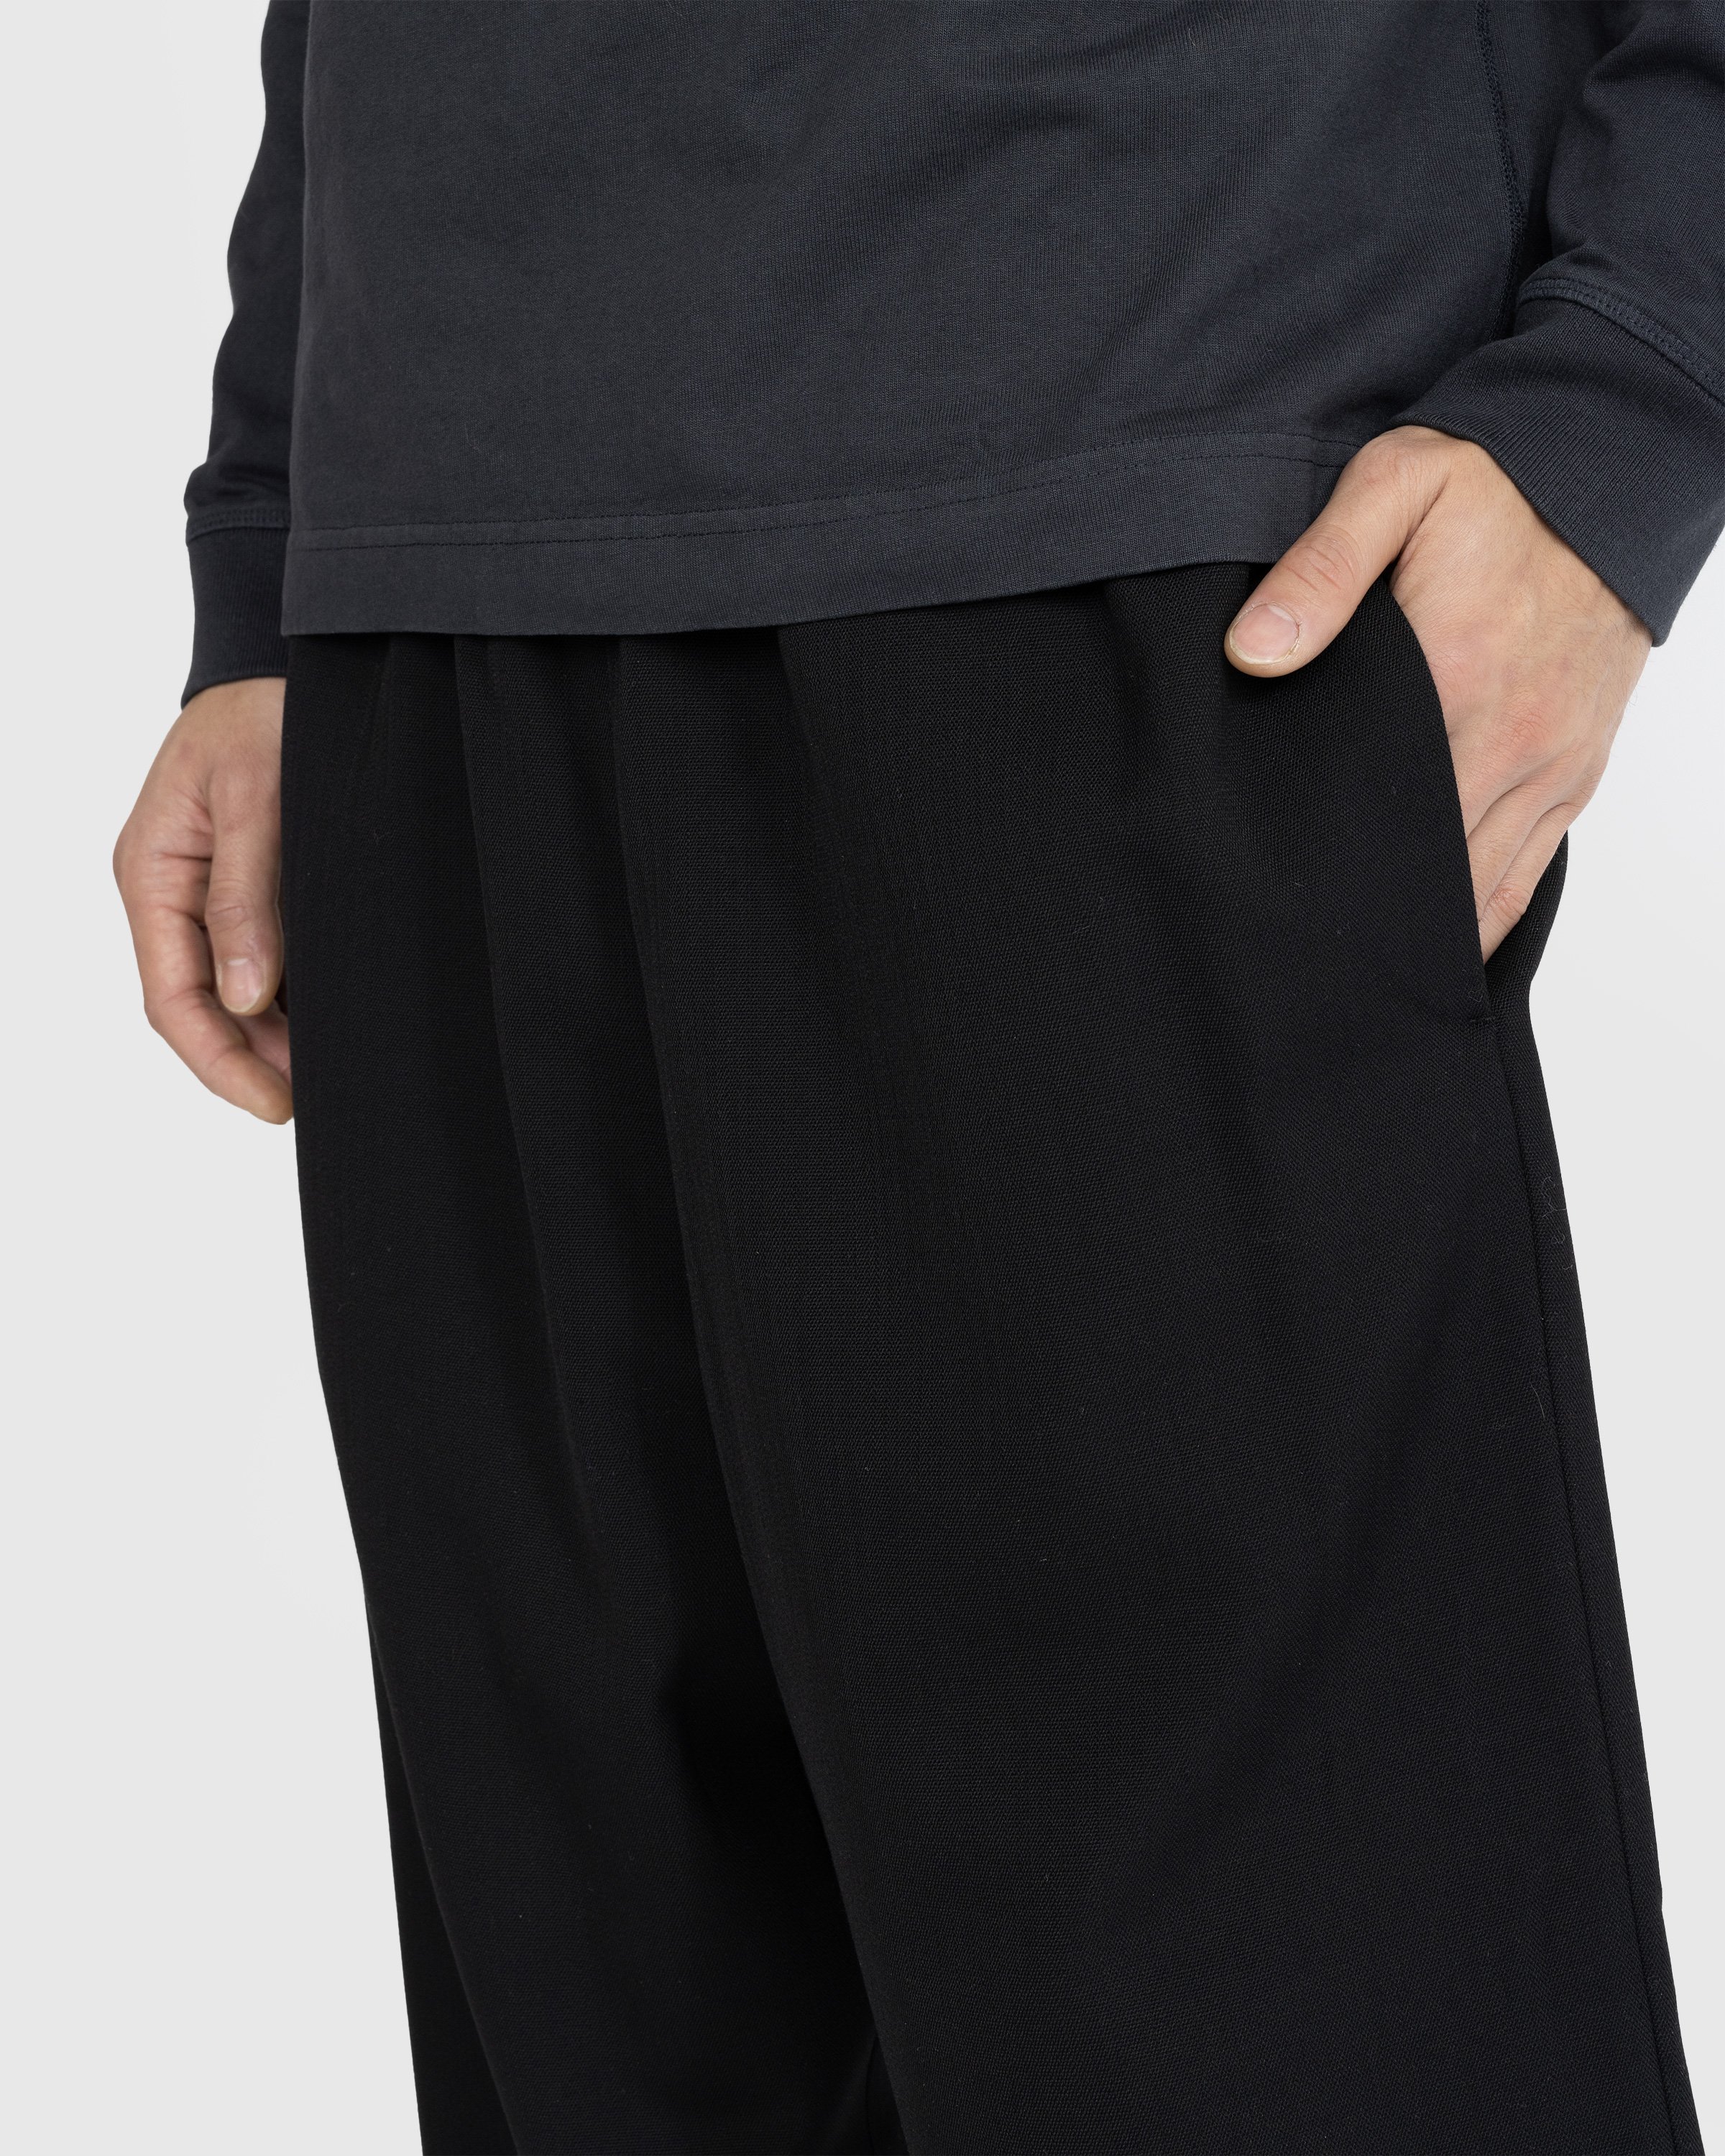 Acne Studios - Tailored Trousers Black - Clothing - Black - Image 5